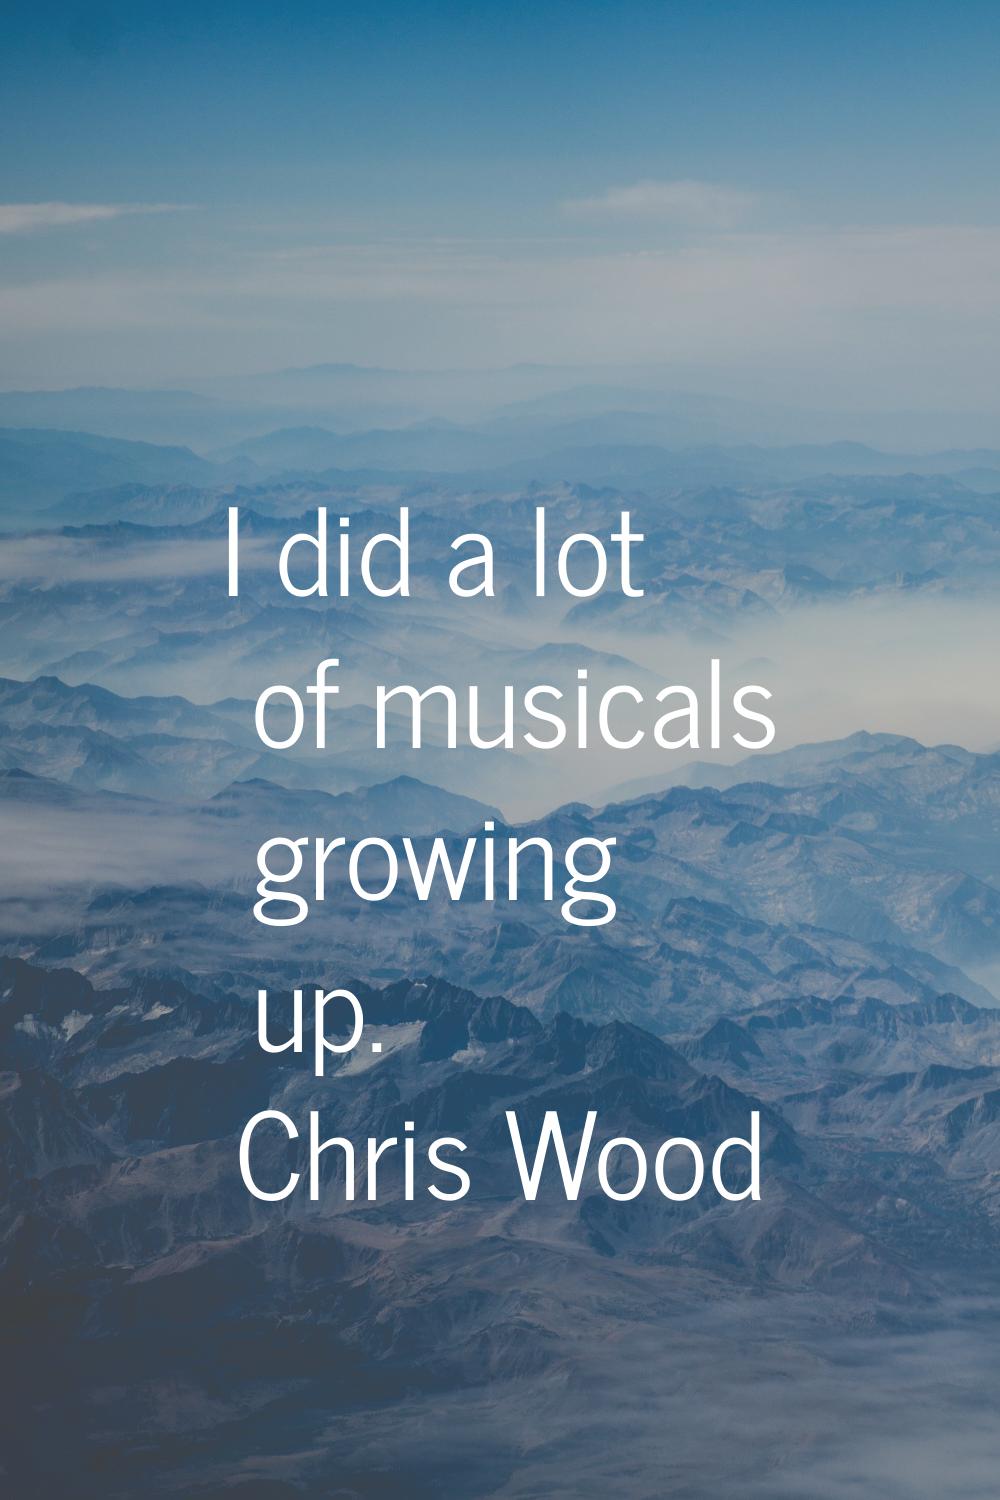 I did a lot of musicals growing up.